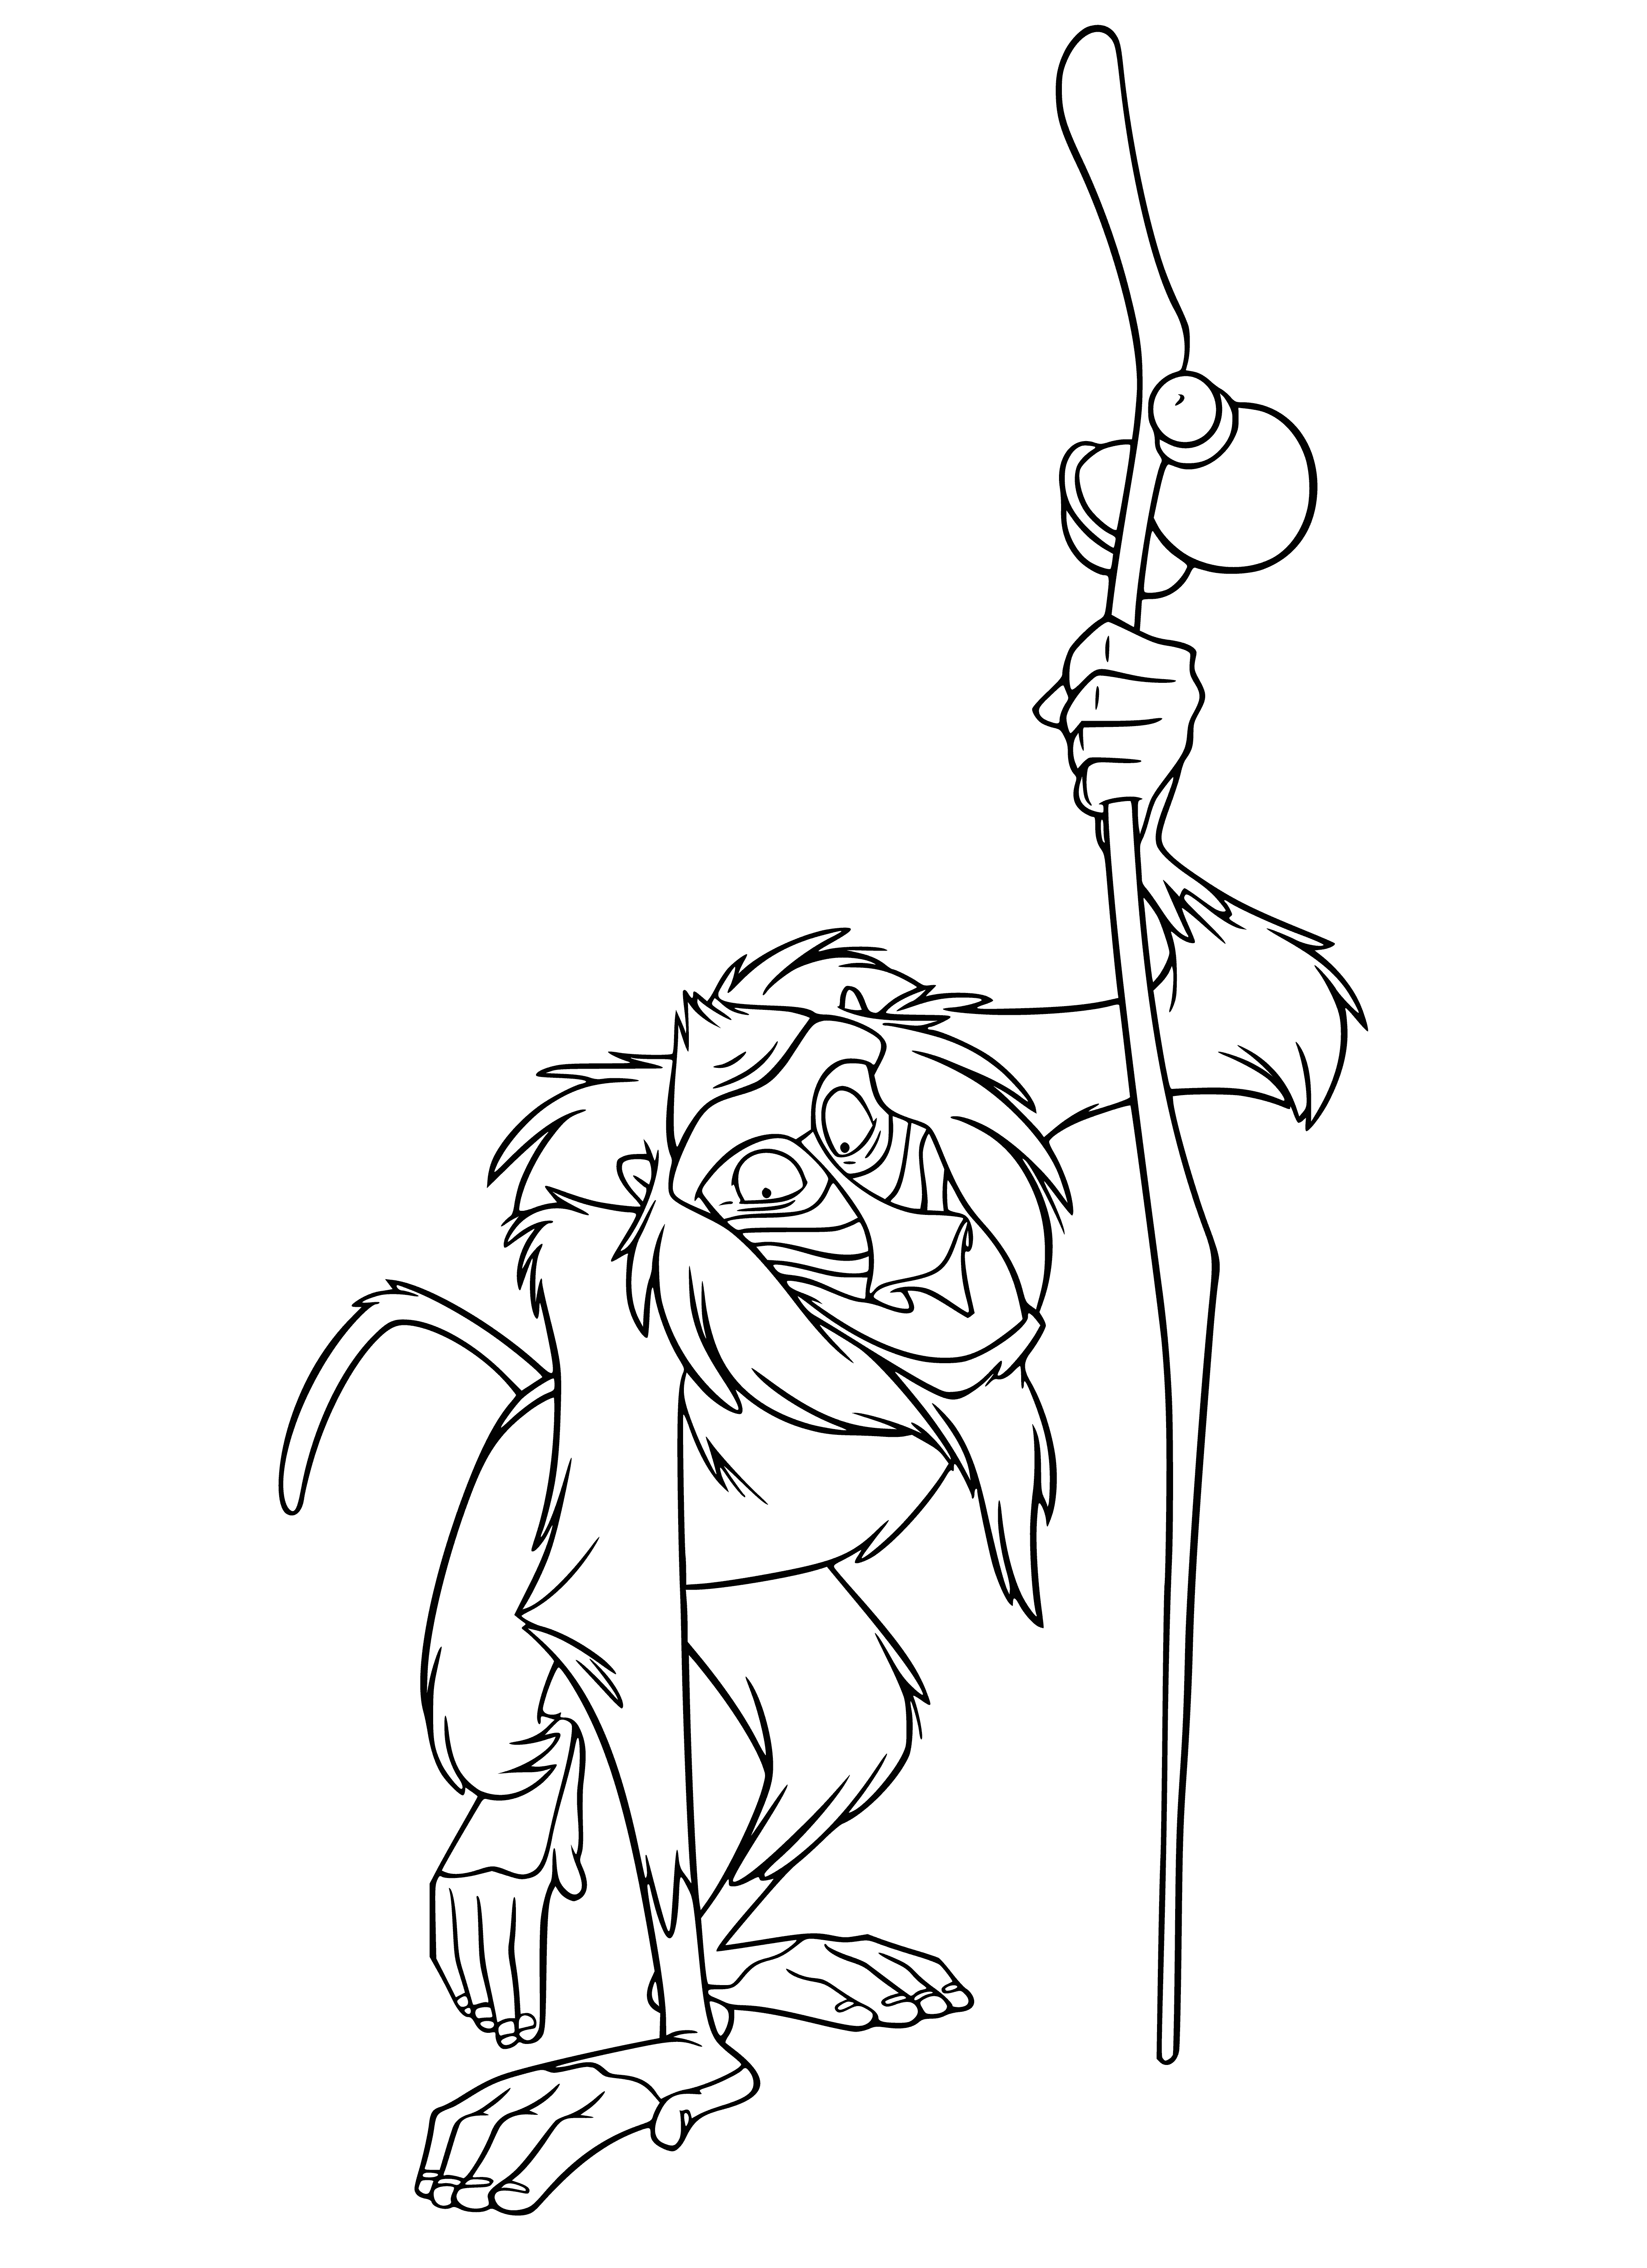 Old wise Rafiki coloring page